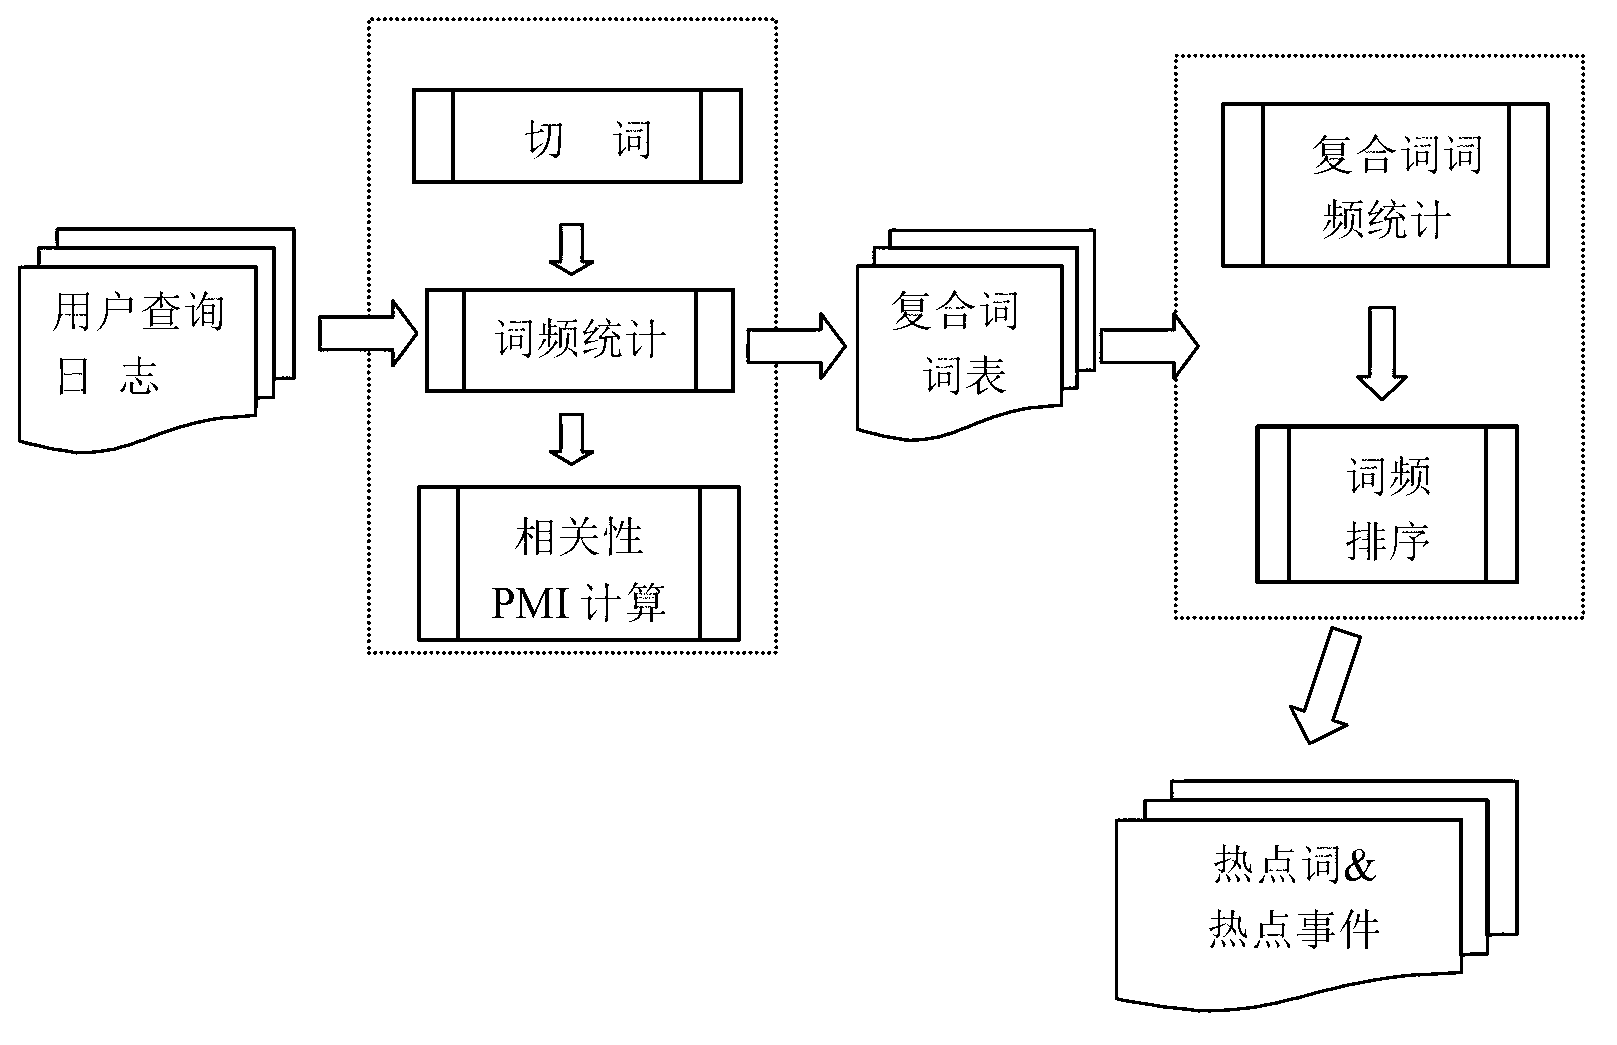 Method and device for finding hot videos based on user query logs in real time